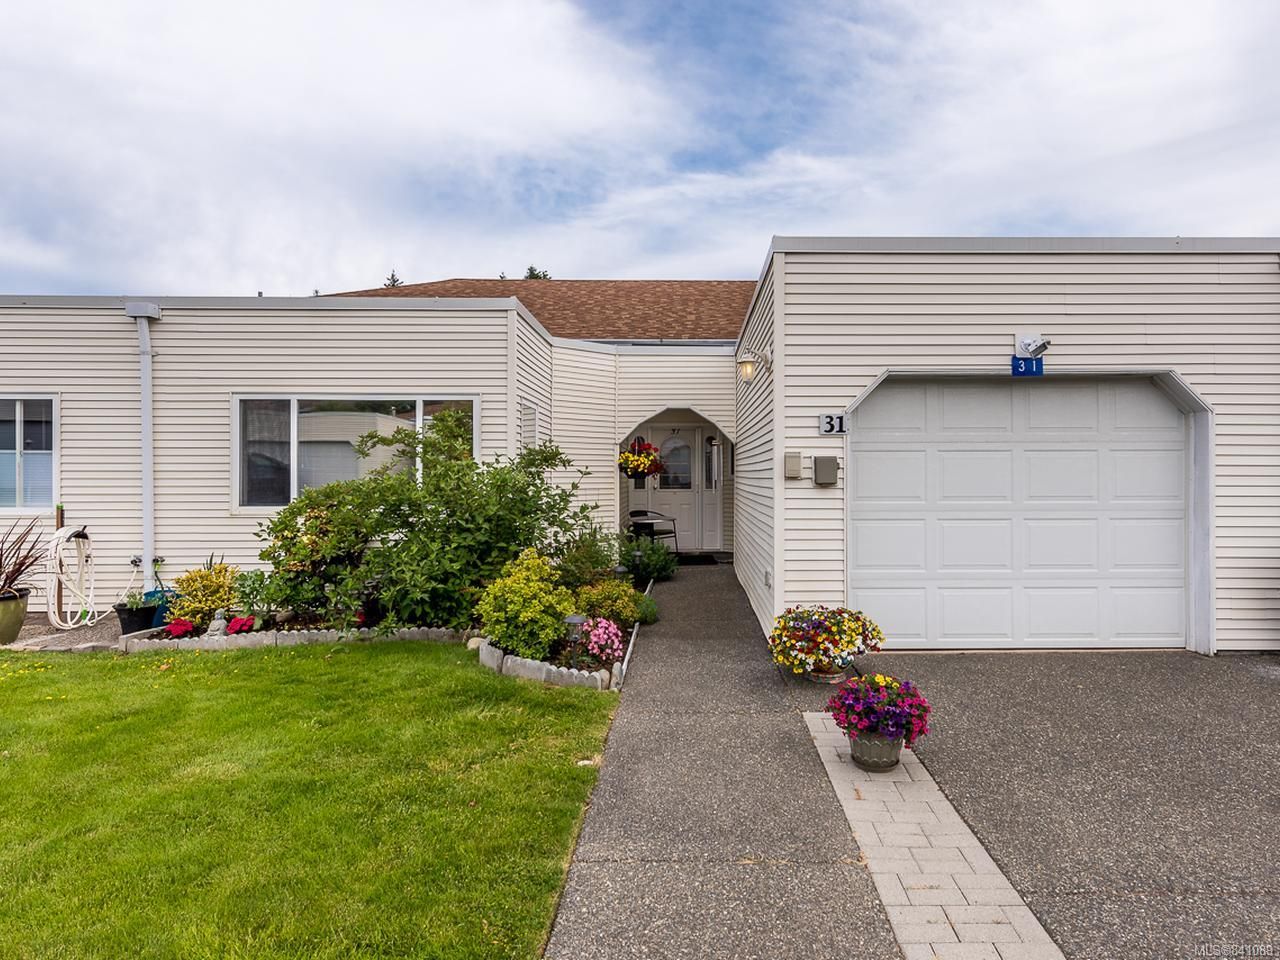 Main Photo: 31 677 Bunting Pl in COMOX: CV Comox (Town of) Row/Townhouse for sale (Comox Valley)  : MLS®# 841089